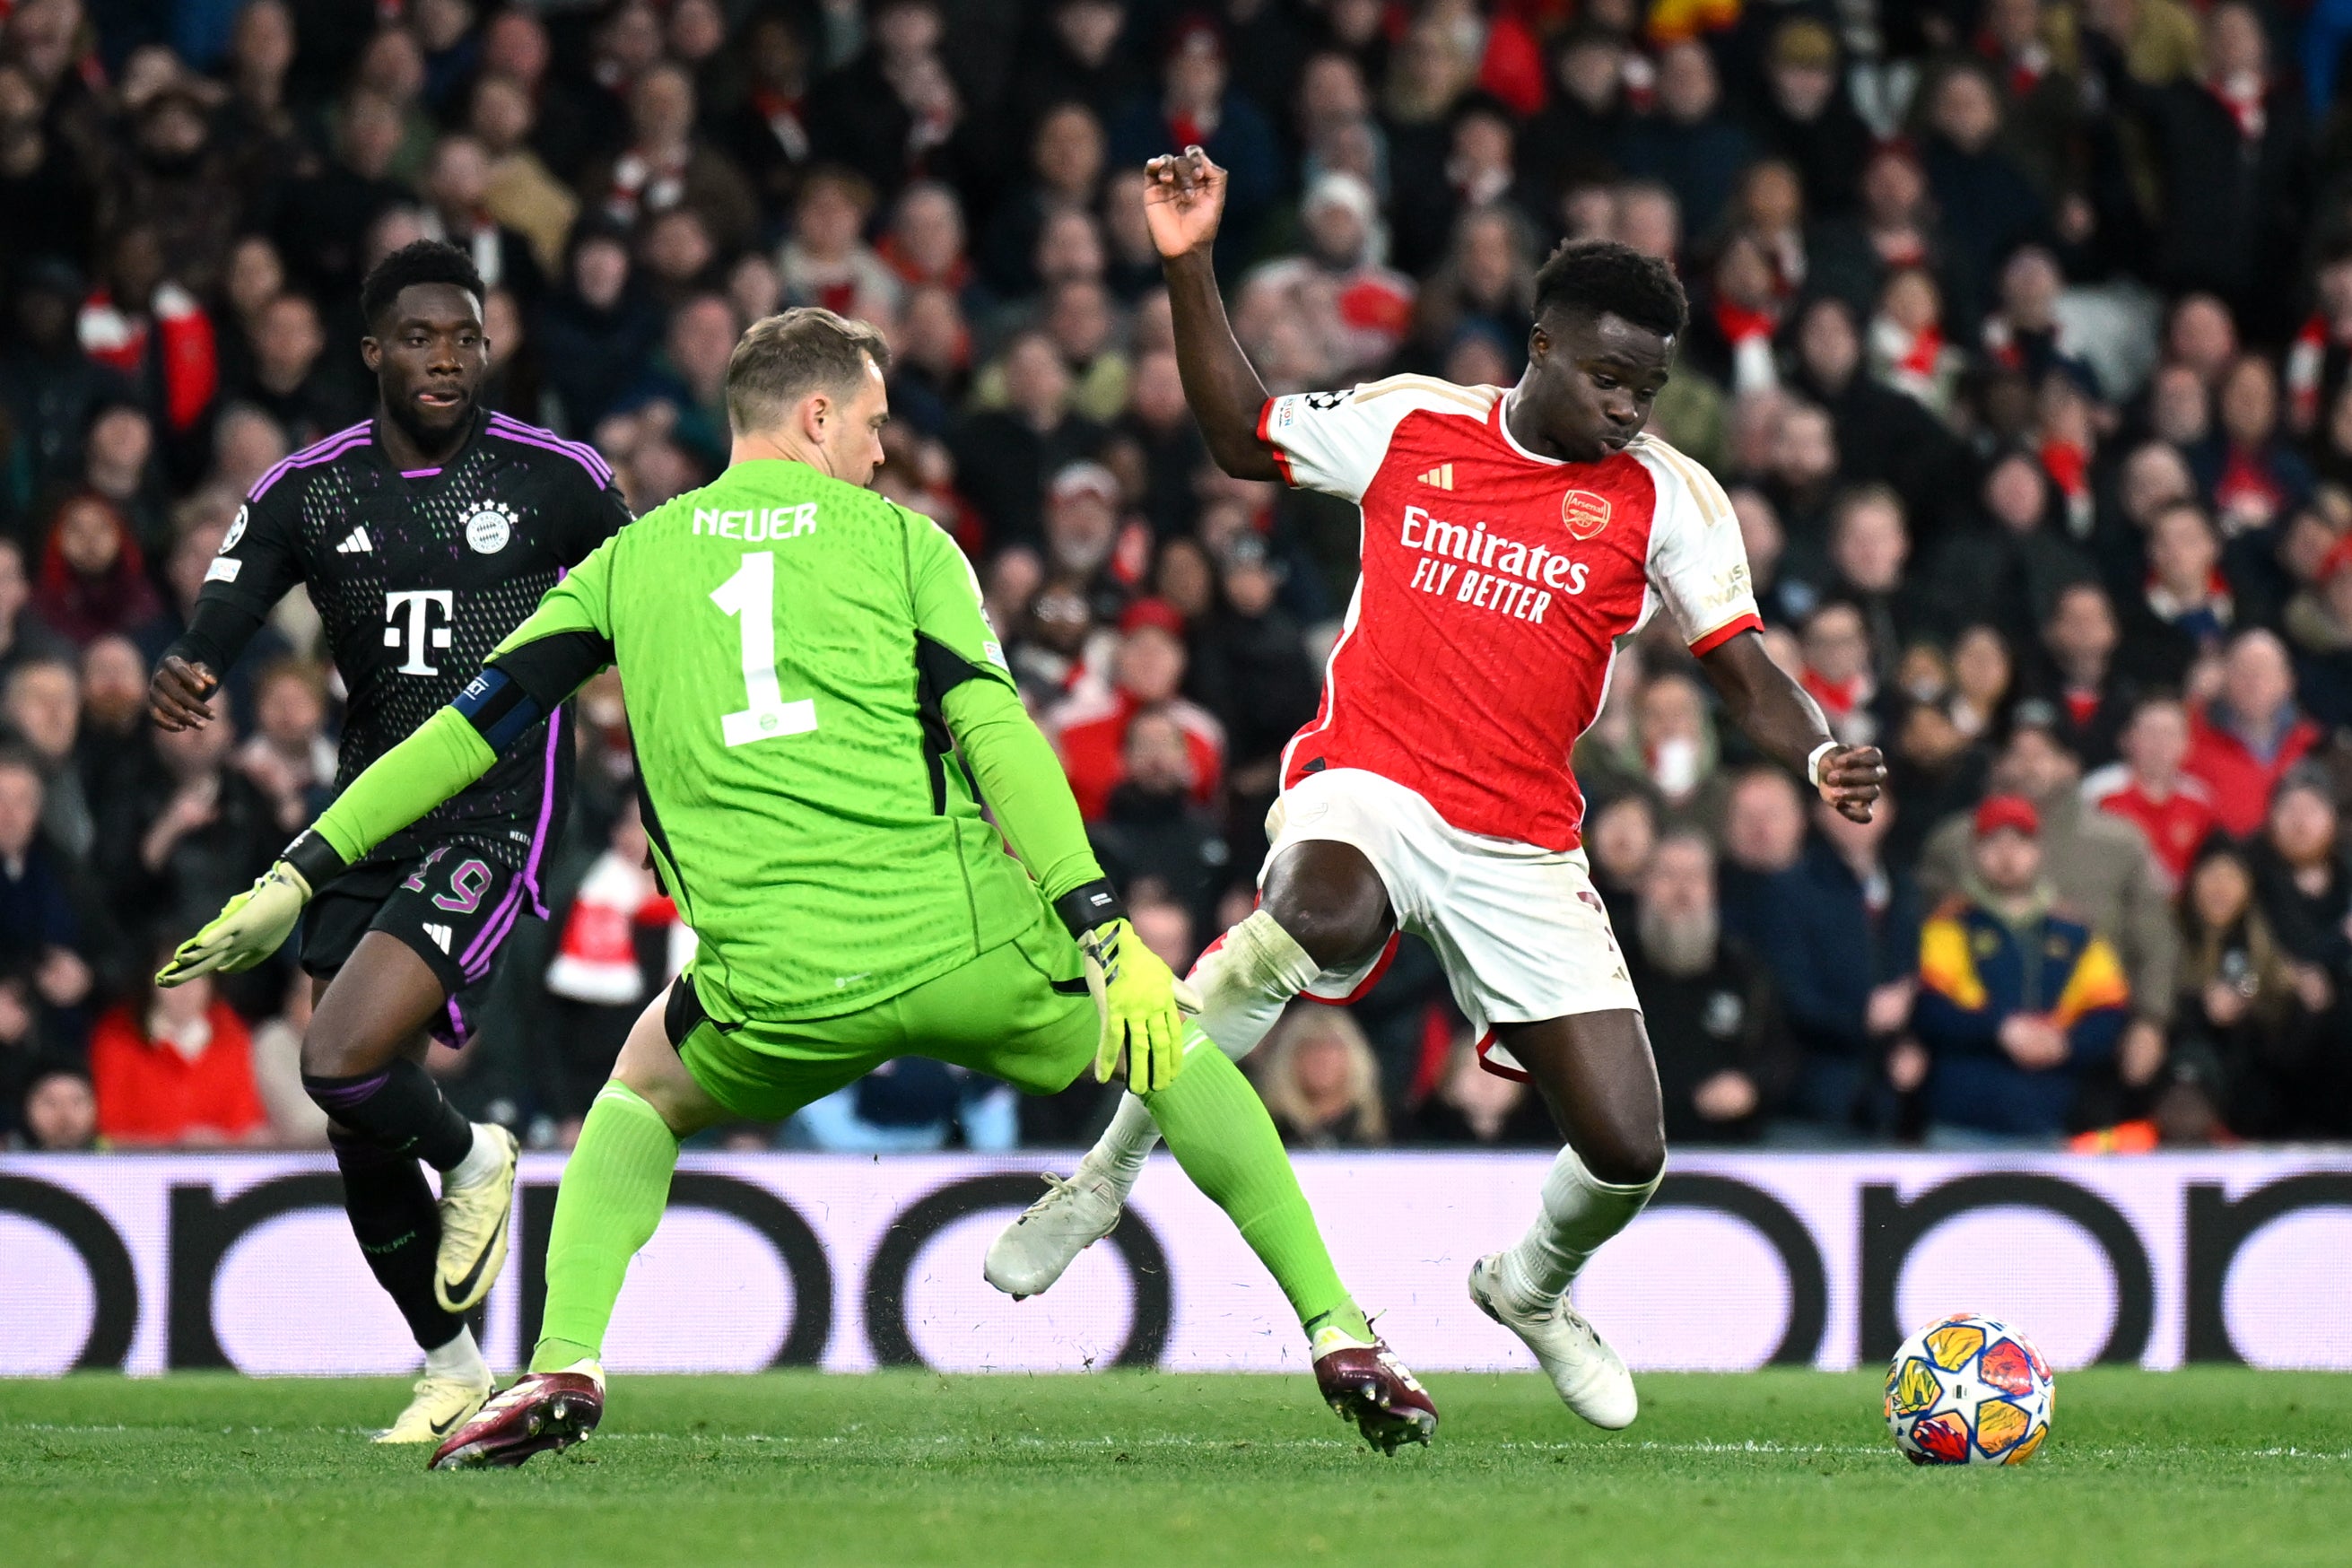 Arsenal vs Bayern Munich LIVE: Champions League result and final score as Bukayo Saka denied late penalty in quarter-final thriller | The Independent